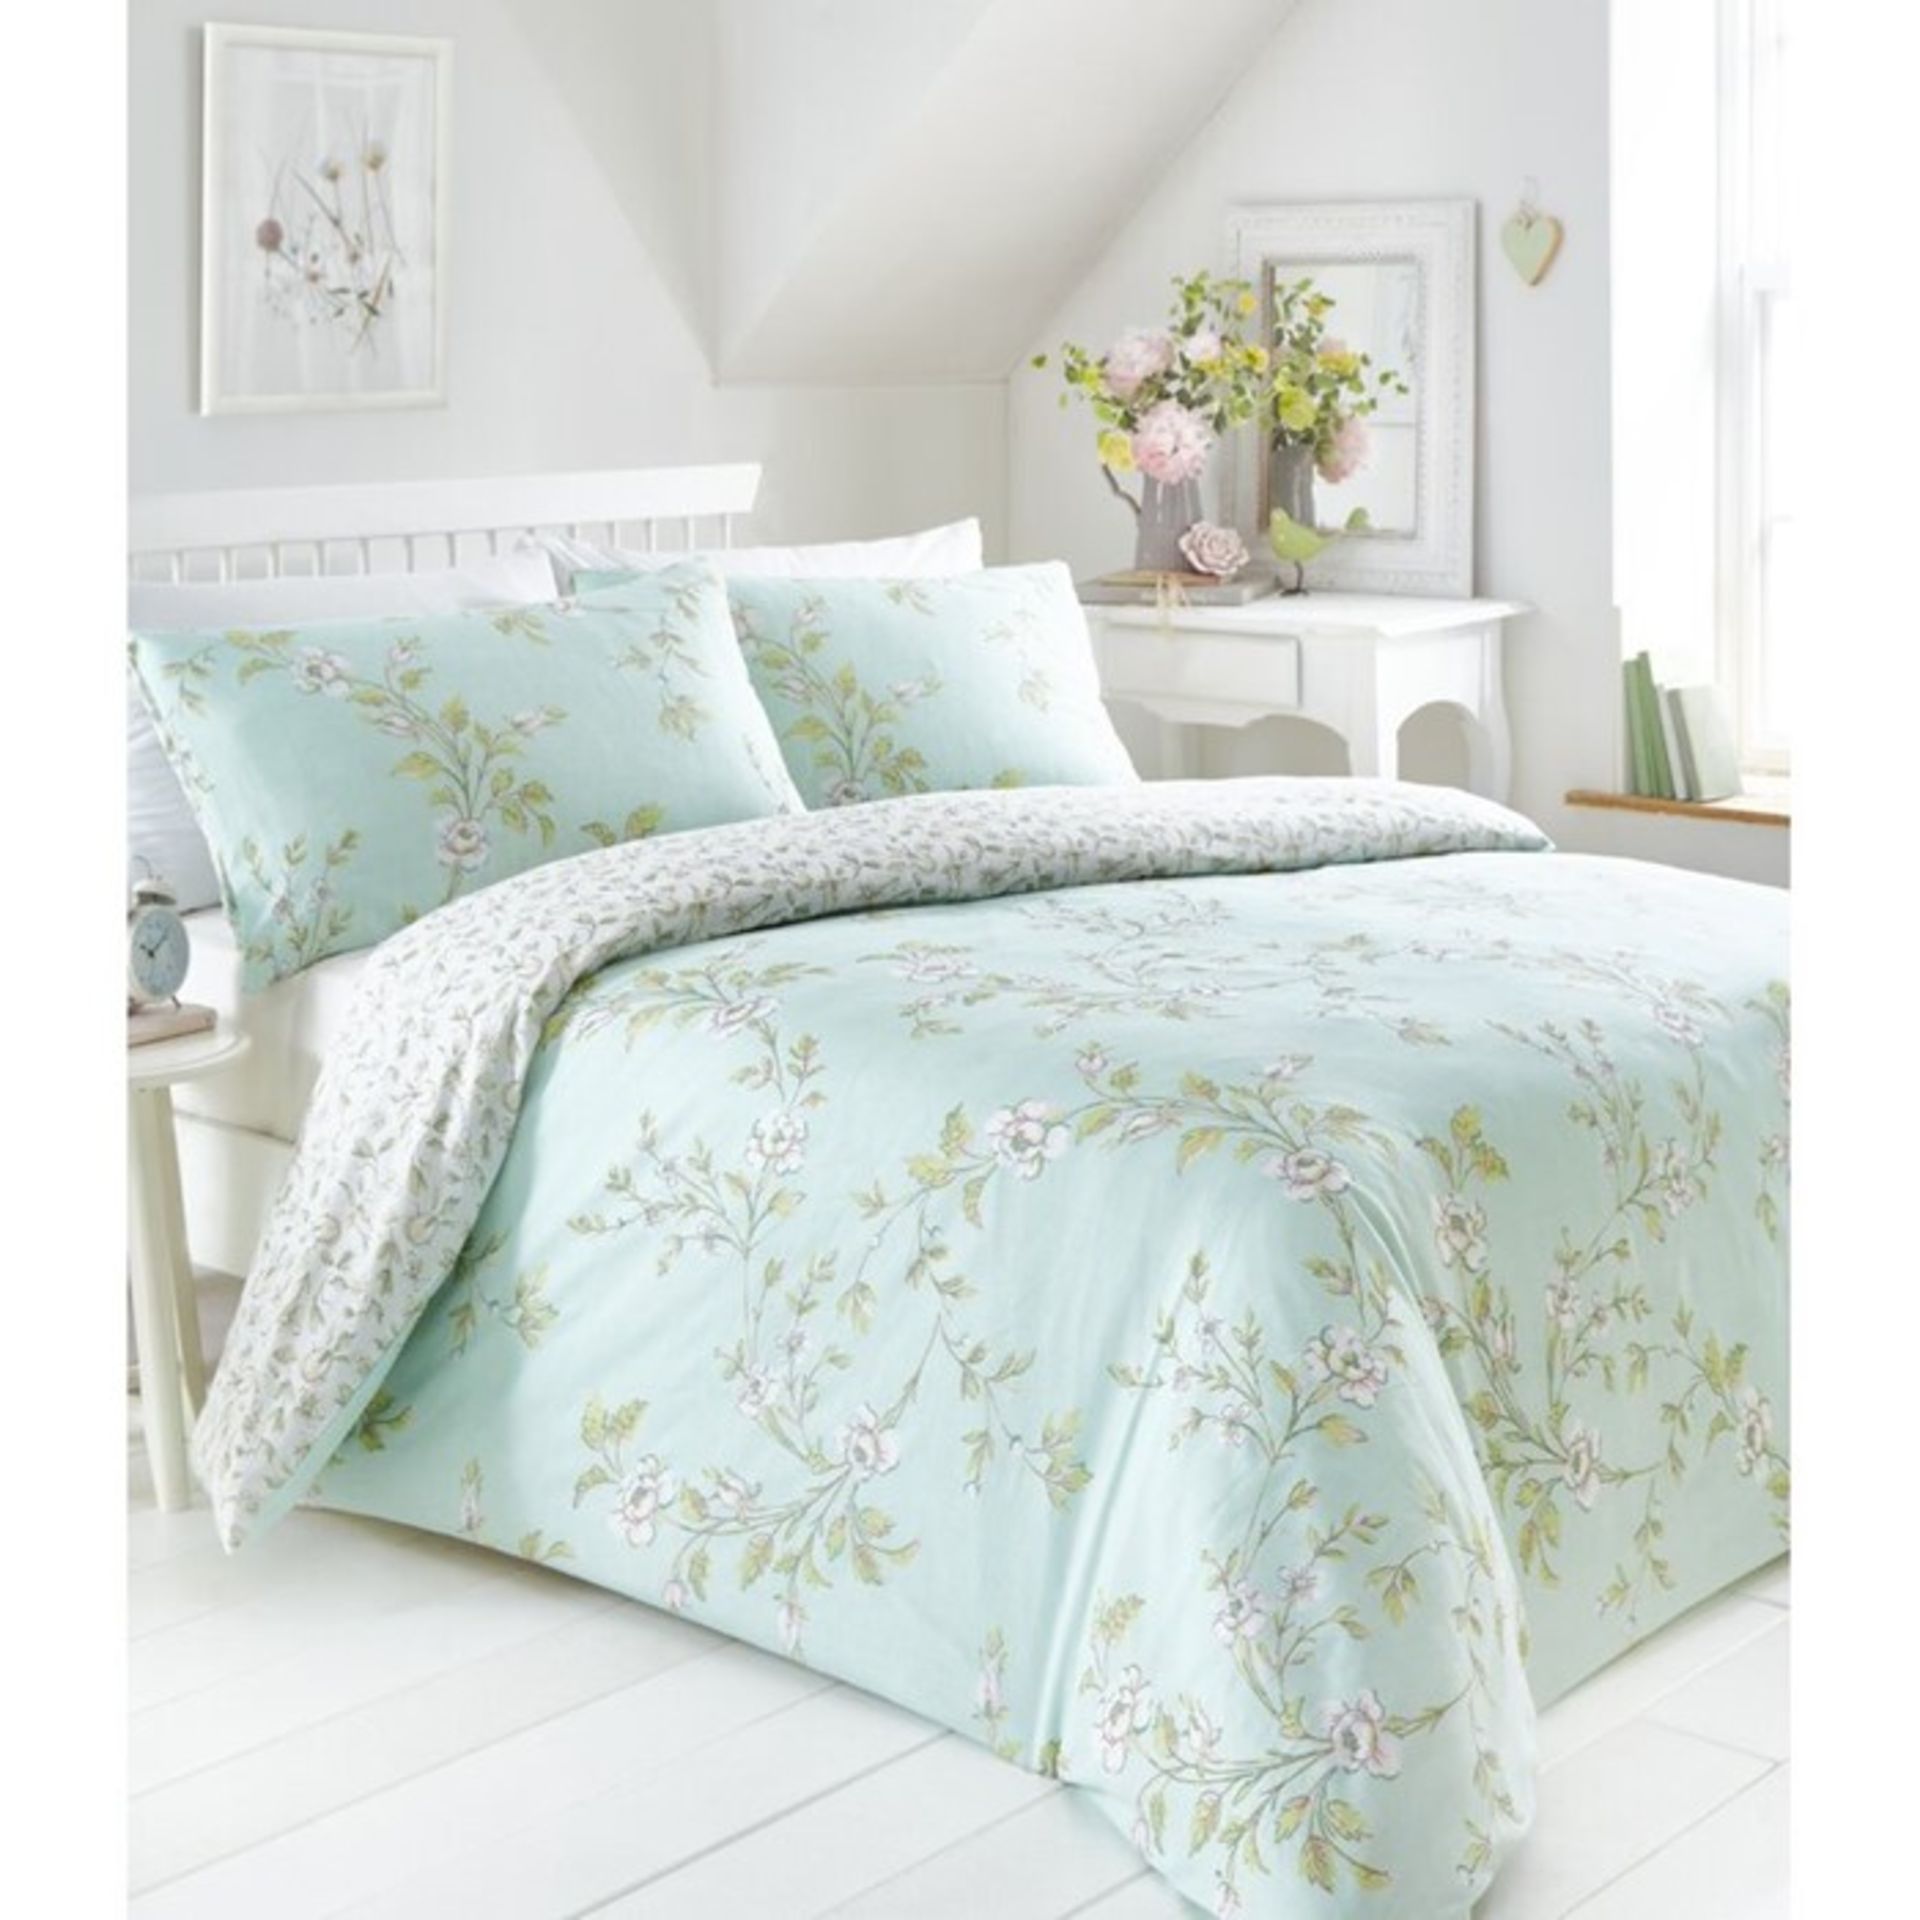 Lily Manor, Hallows Creek Duvet Cover Set (KING / DUCK EGG) - RRP £22.99 (AAIF1033.40039919 -